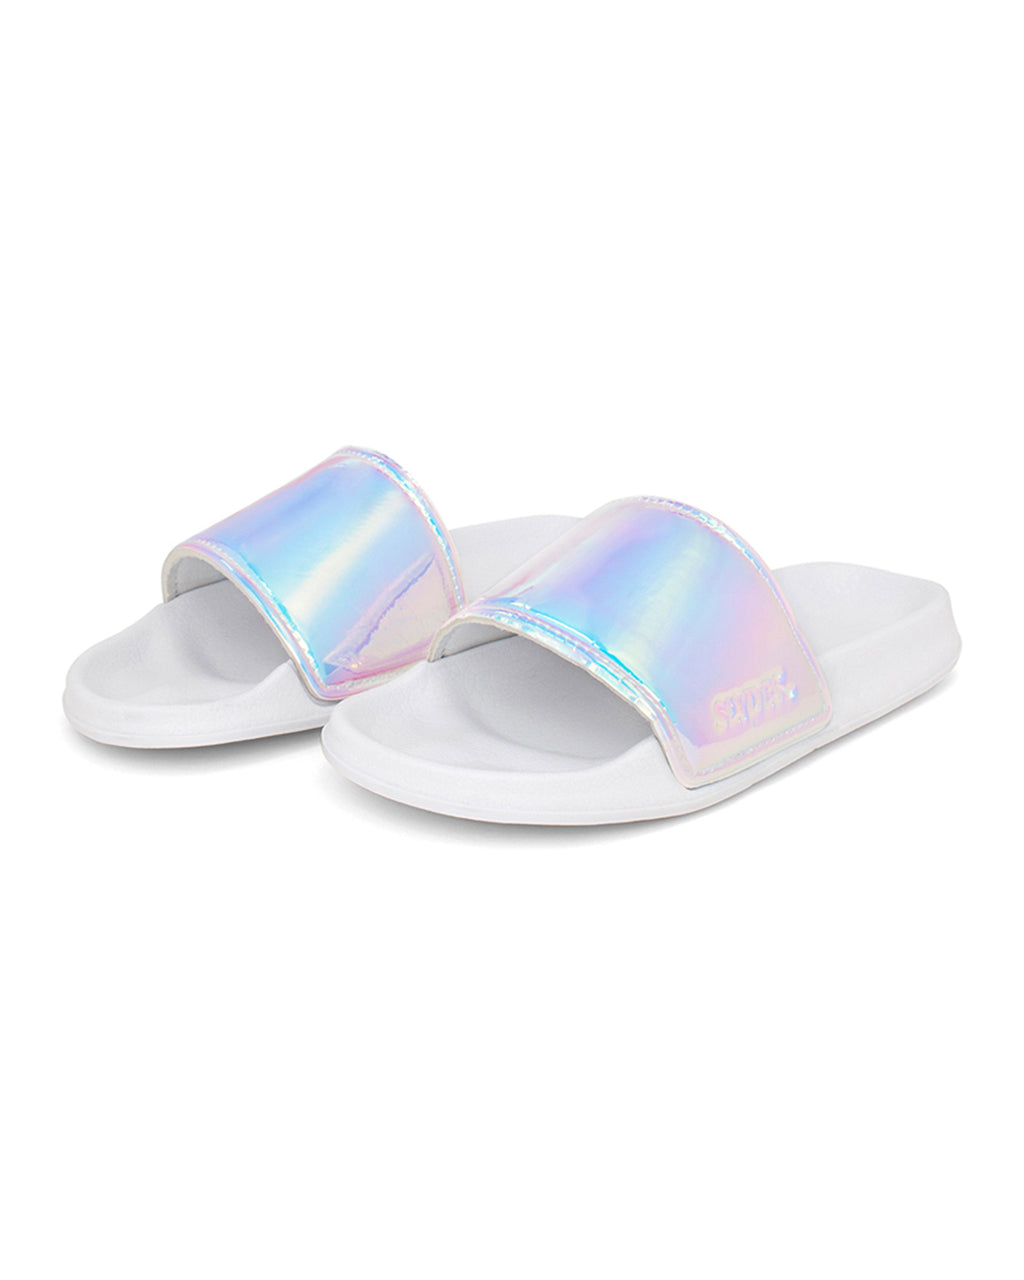 Iridescent Slides by slydes - shoes - ban.do